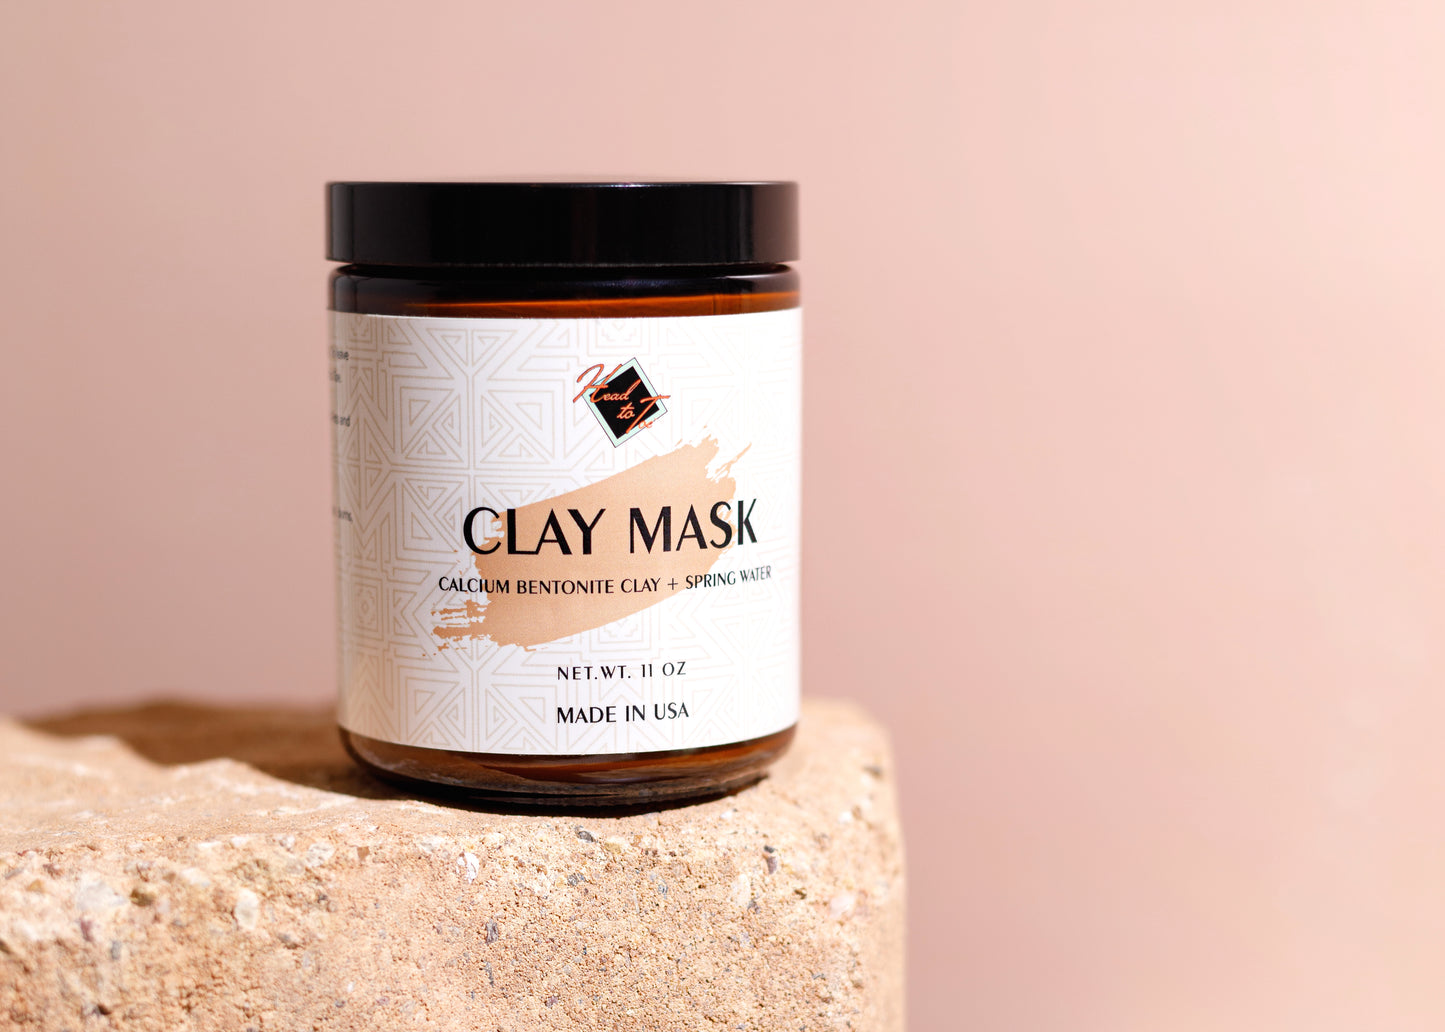 Cleansing Clay Mask